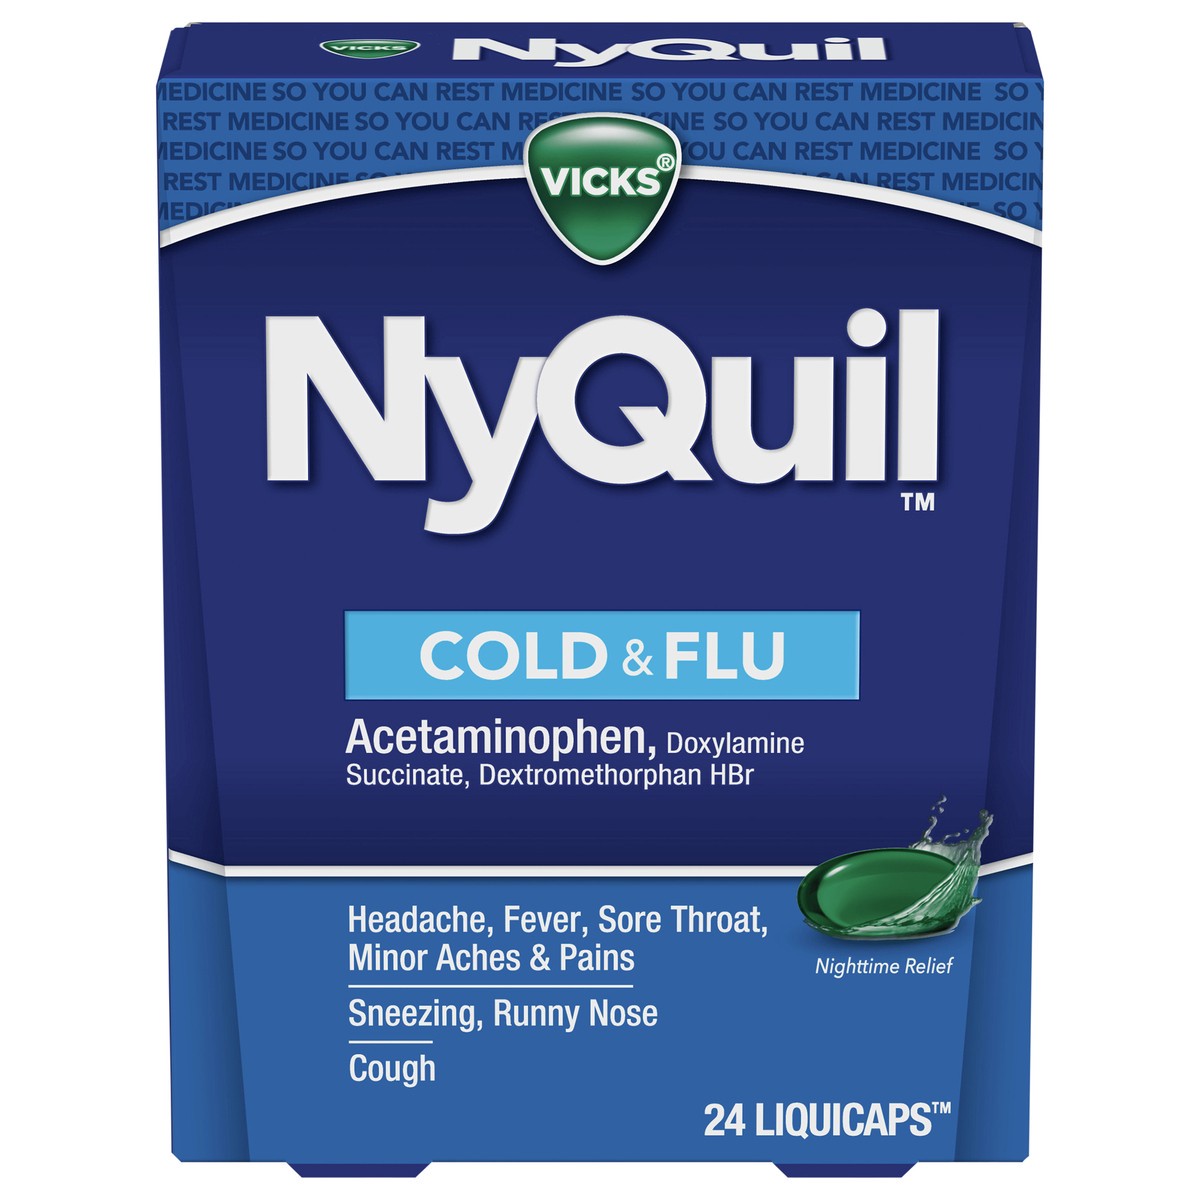 slide 1 of 68, NyQuil Vicks NyQuil Cold & Flu Medicine LiquiCaps - 24ct, 24 ct